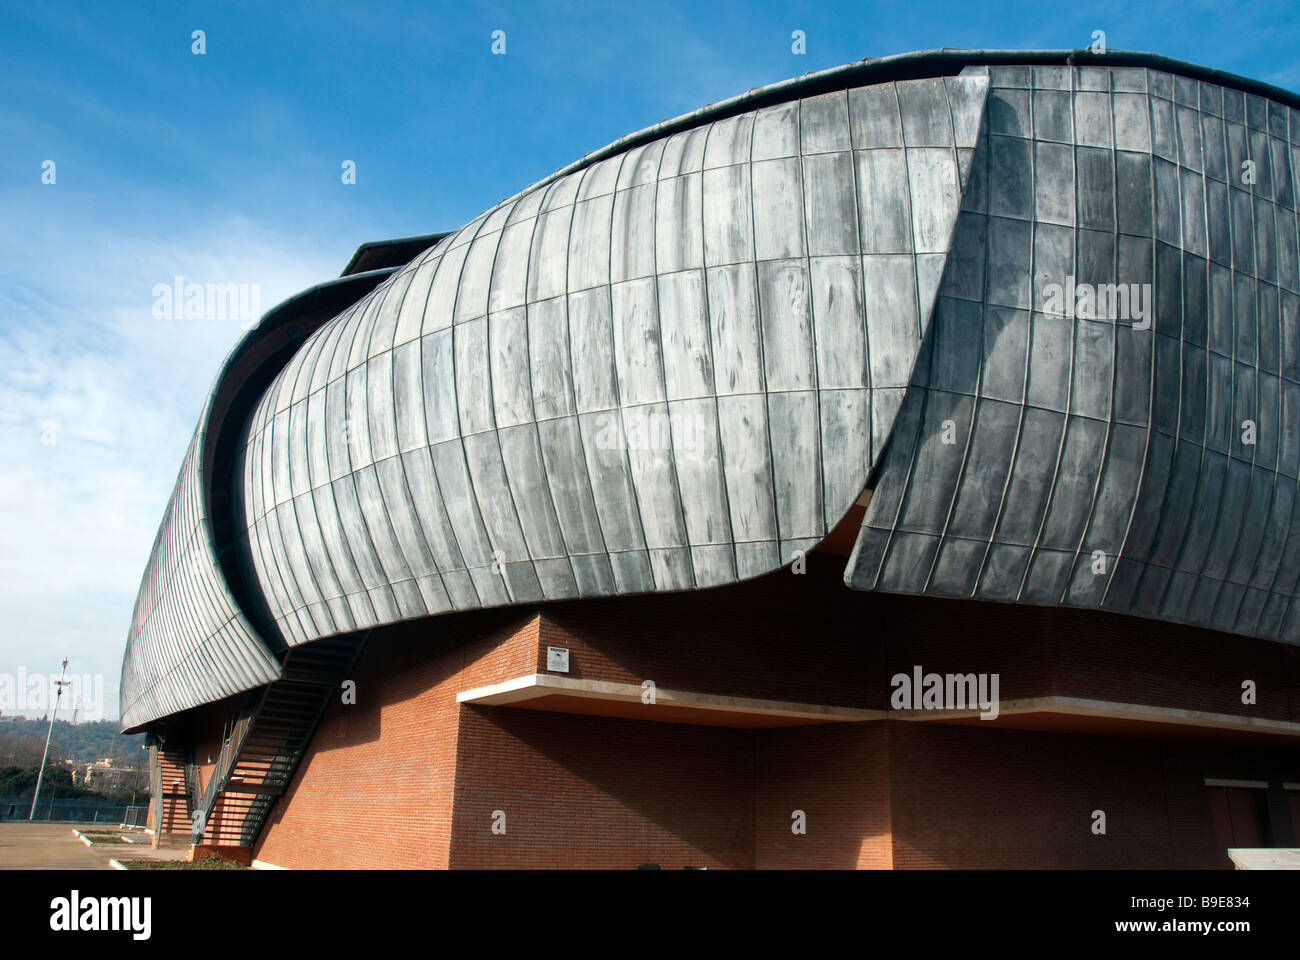 Rear view of The Auditorium, one of three concert halls in the Parco della Musica designed by the architect Renzo Piano Stock Photo